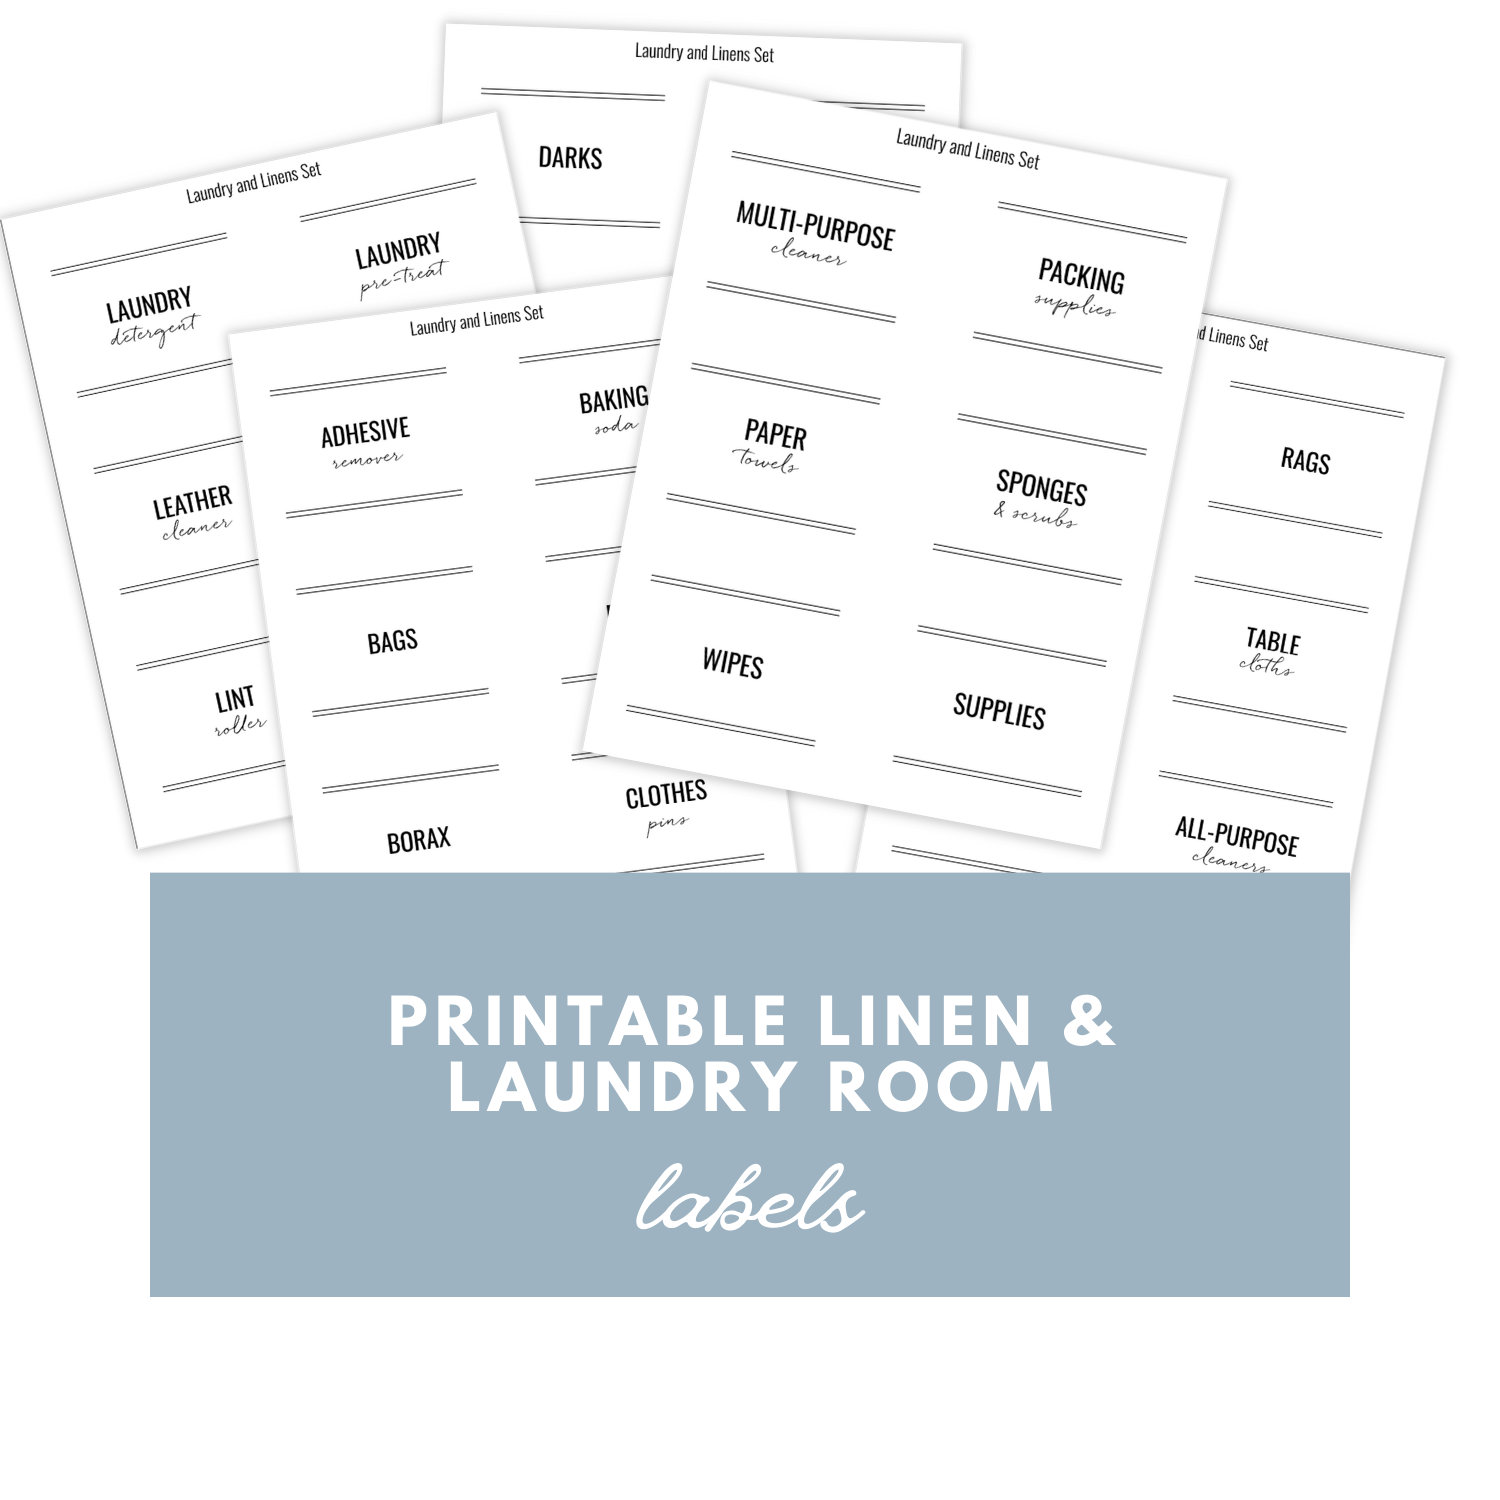 laundry room labels pdf download